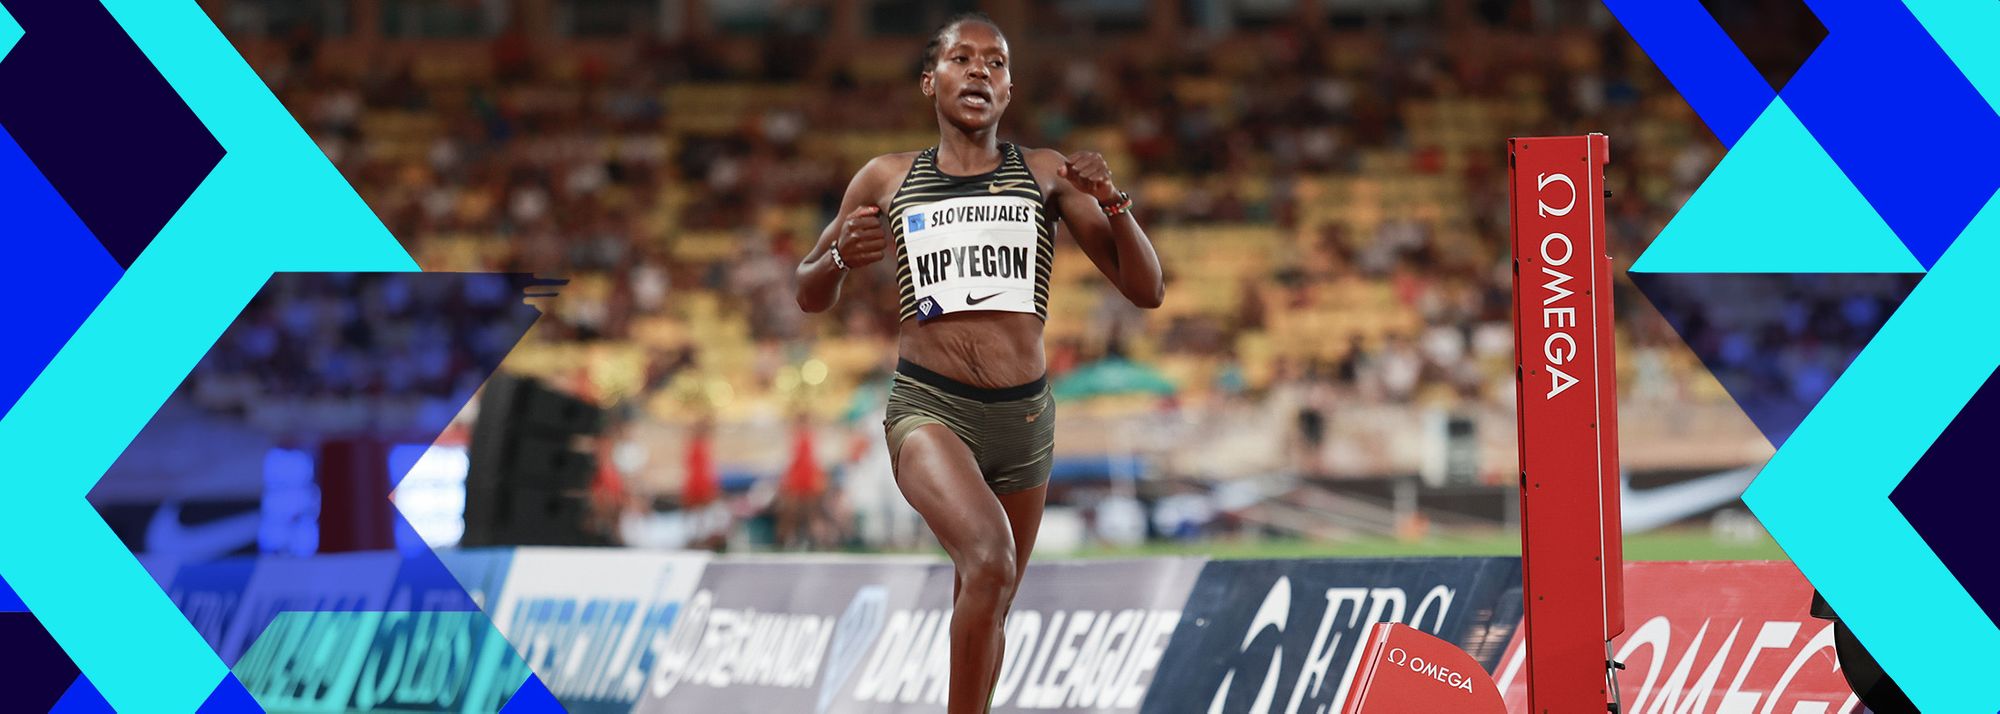 Faith Kipyegon comes within 0.3 of world 1500m record, Fraser-Pryce dashes to 10.62 over 100m